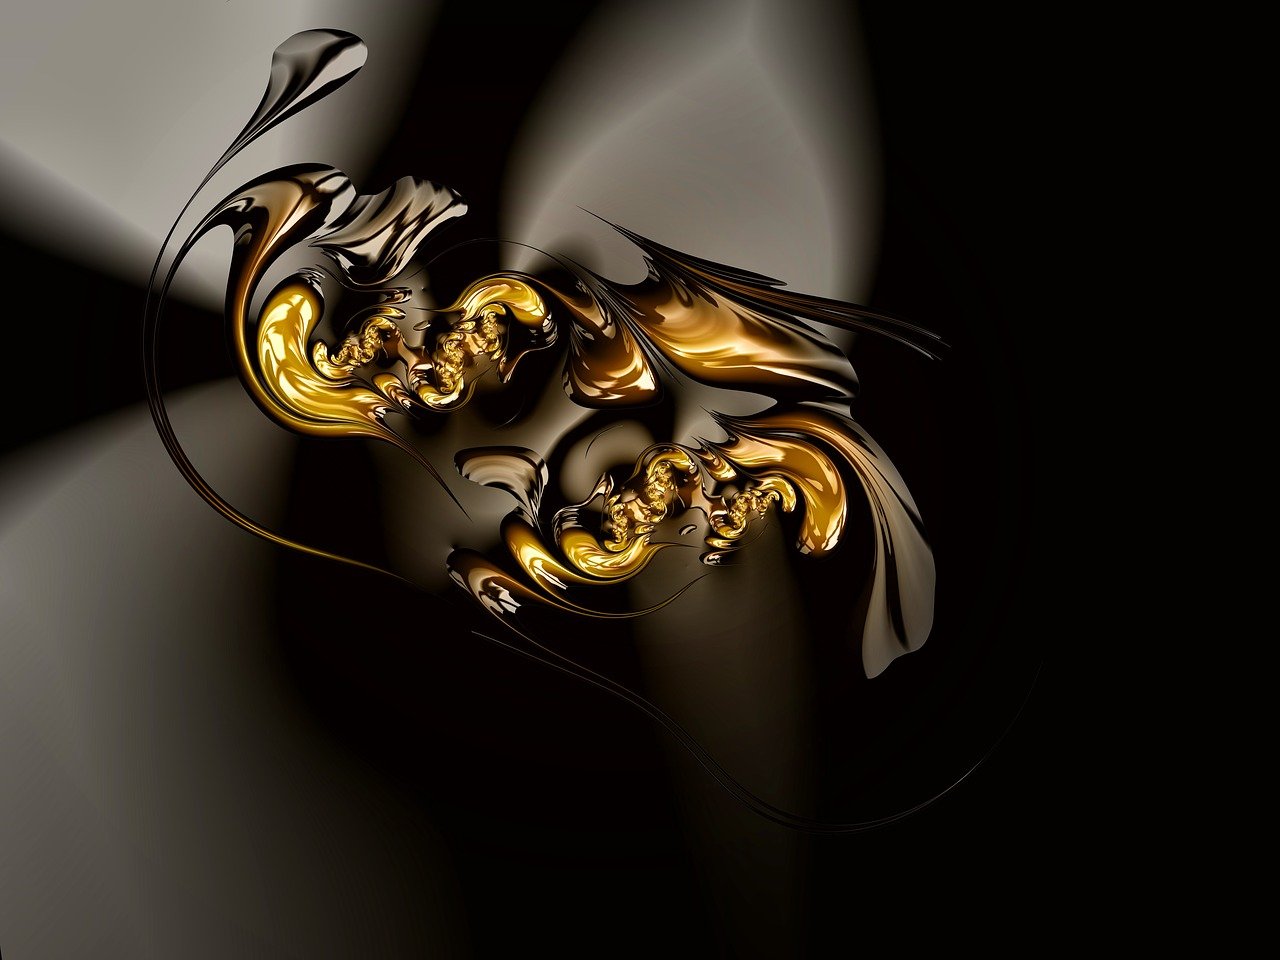 a computer generated image of a woman's face, digital art, inspired by Fabien Charuau, liquid golden and black fluid, organic ceramic fractal forms, twisted turn of fate abstraction, liquid polished metal